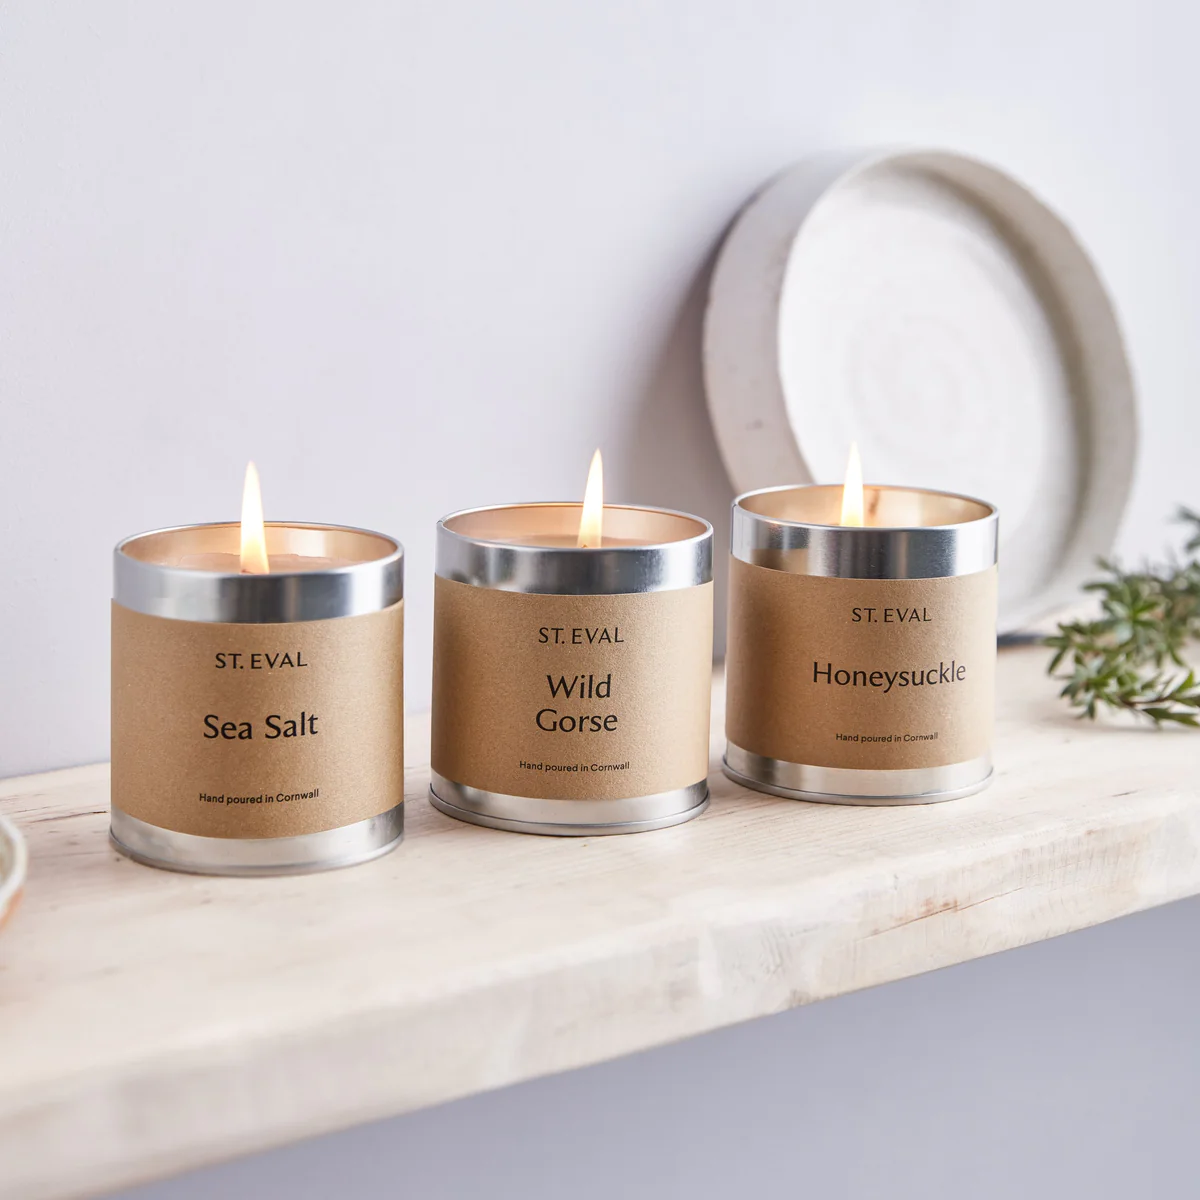 Enjoy sustainably crafted candles, diffusers from St Eval, a brand with people and the planet at their core. Their unique nature-inspired scents imbue the beautiful coast and countryside surrounding us.